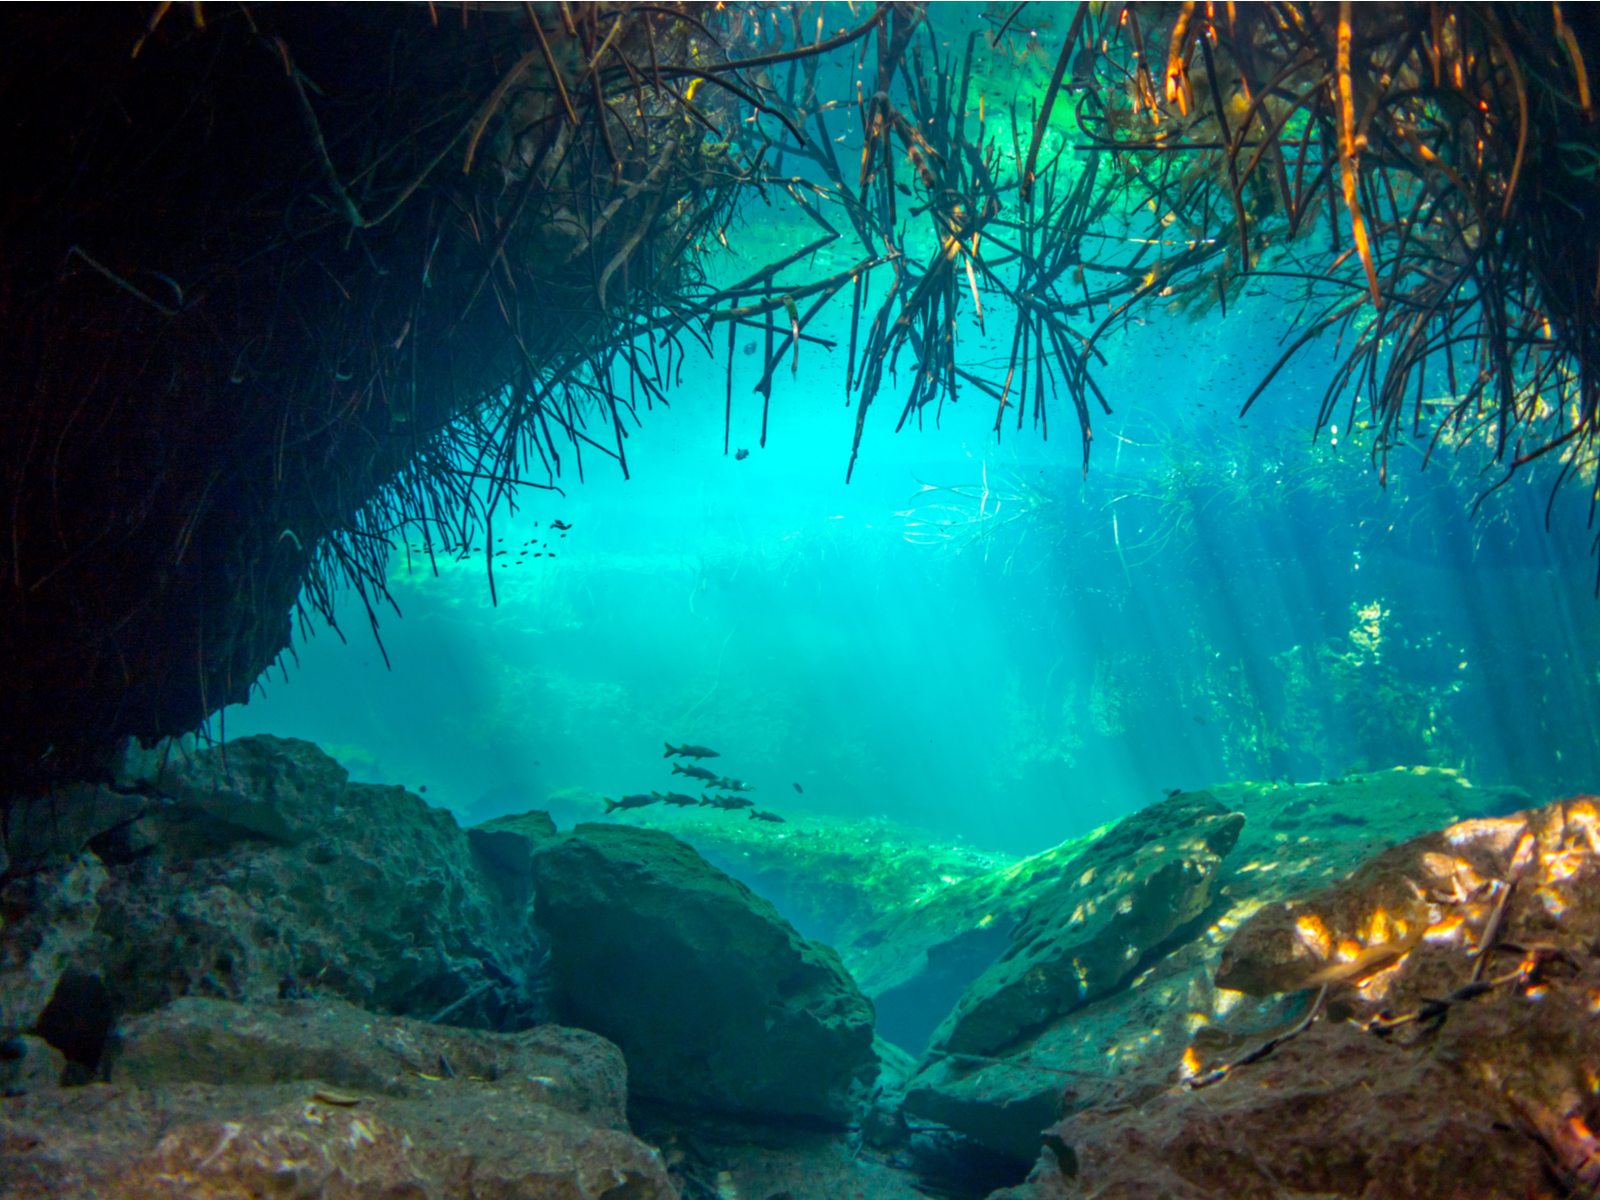 Underwater view of the Casa Cenote, one of the best cenotes in Mexico, with fish swimming above the rocks